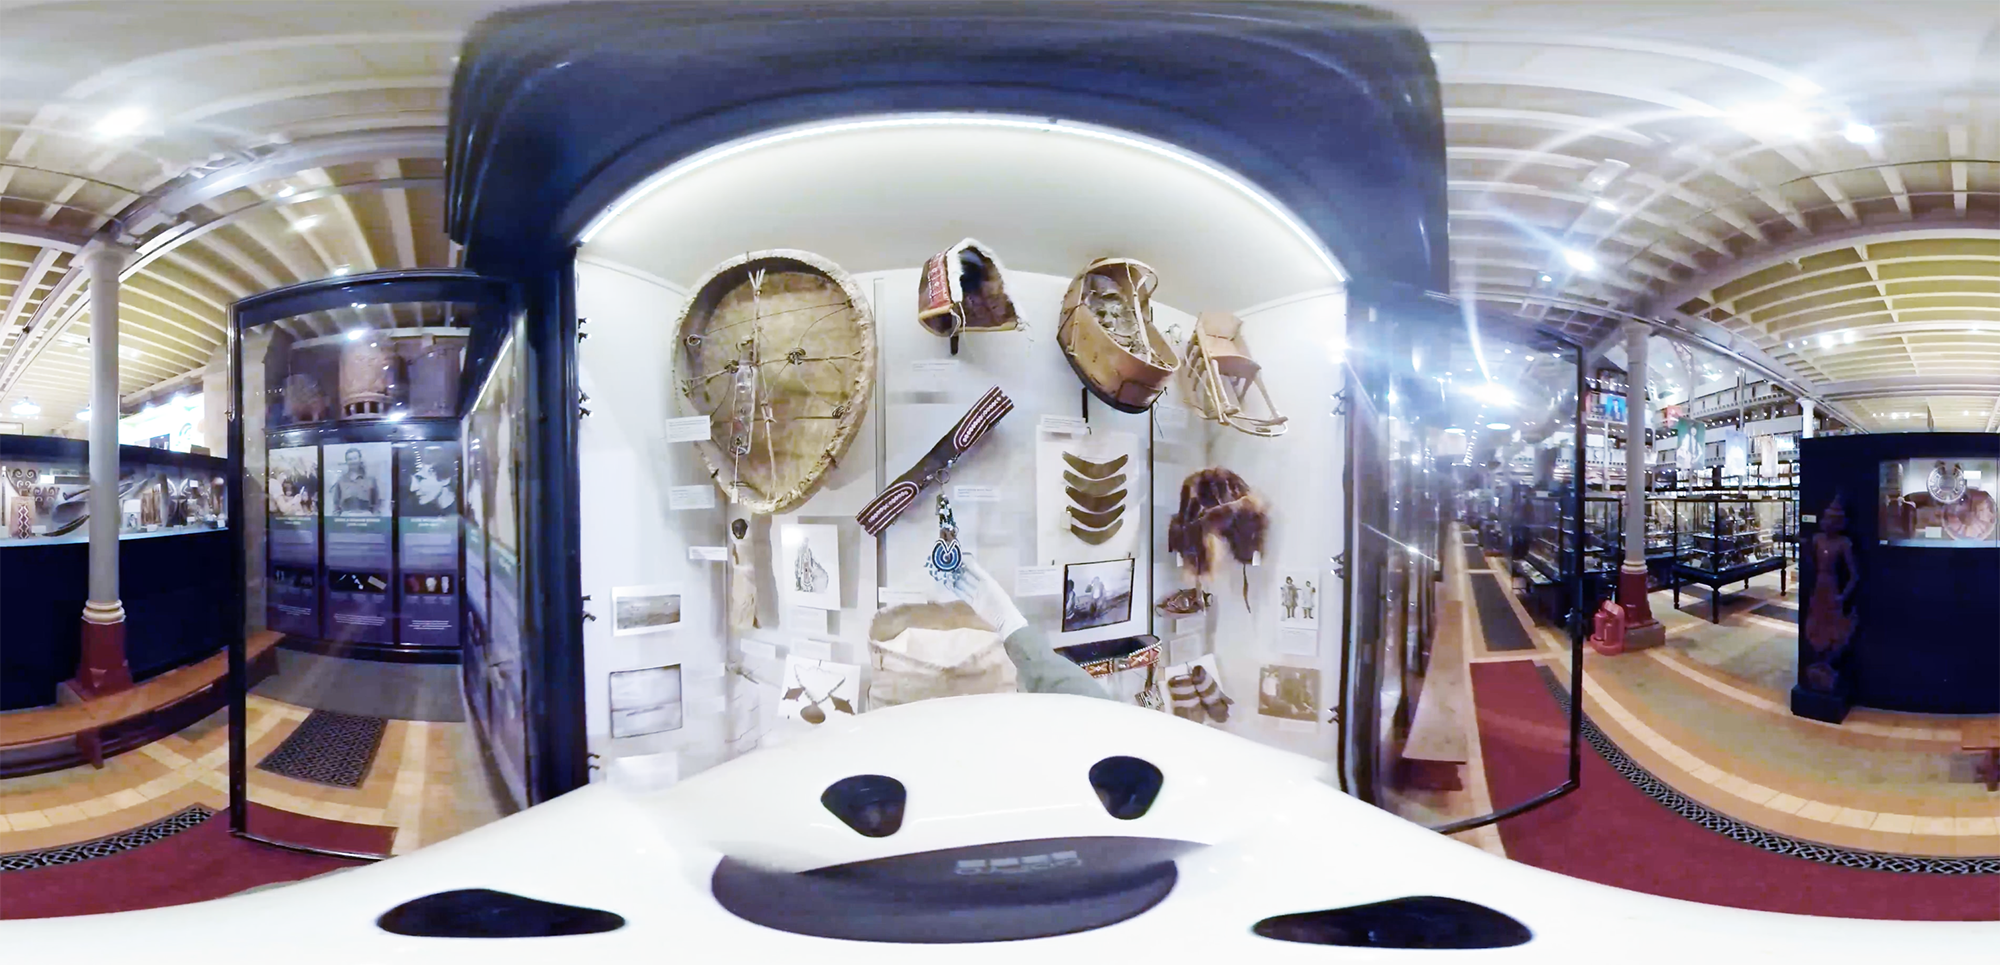 A 360 degree bodycam view focusing on a person's hand touching a blue beadwork object in the centre of an open display case.